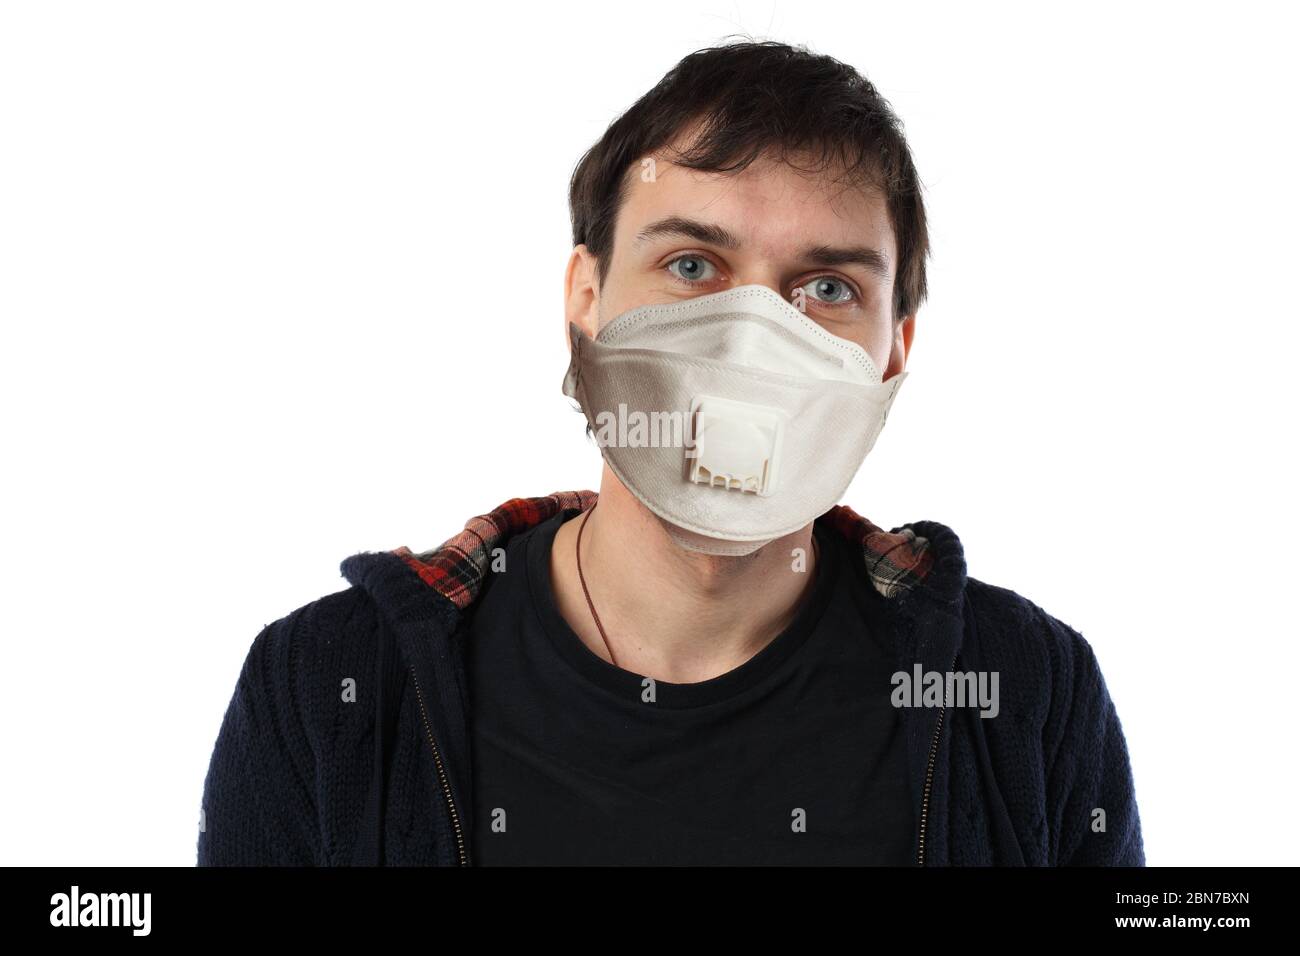 Man in protective mask isolated on white background Stock Photo